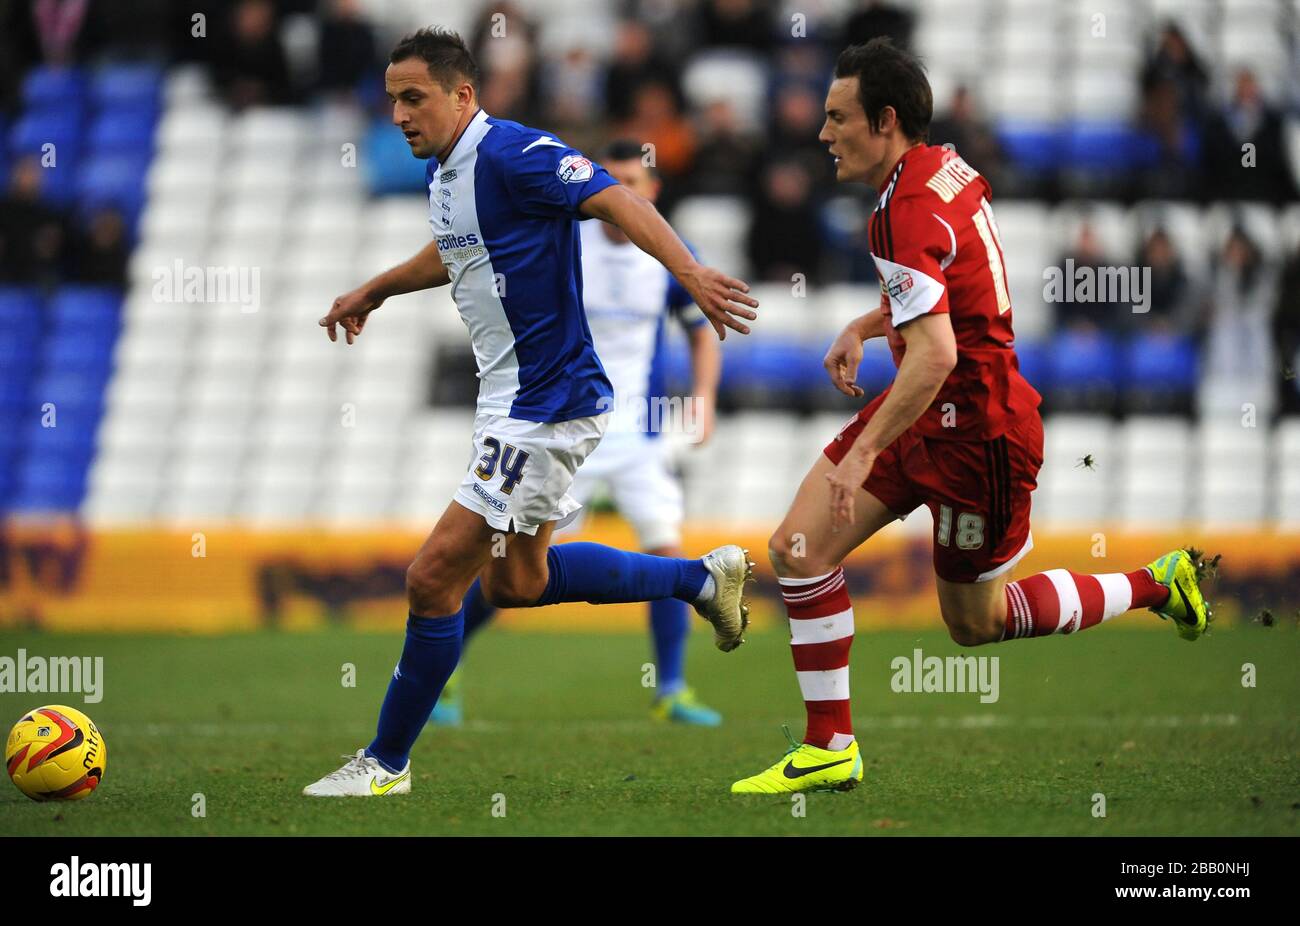 Birmingham City's Dariusz Dudka (left) and Middlesbrough's Dean Whitehead (right) battle for the ball. Stock Photo